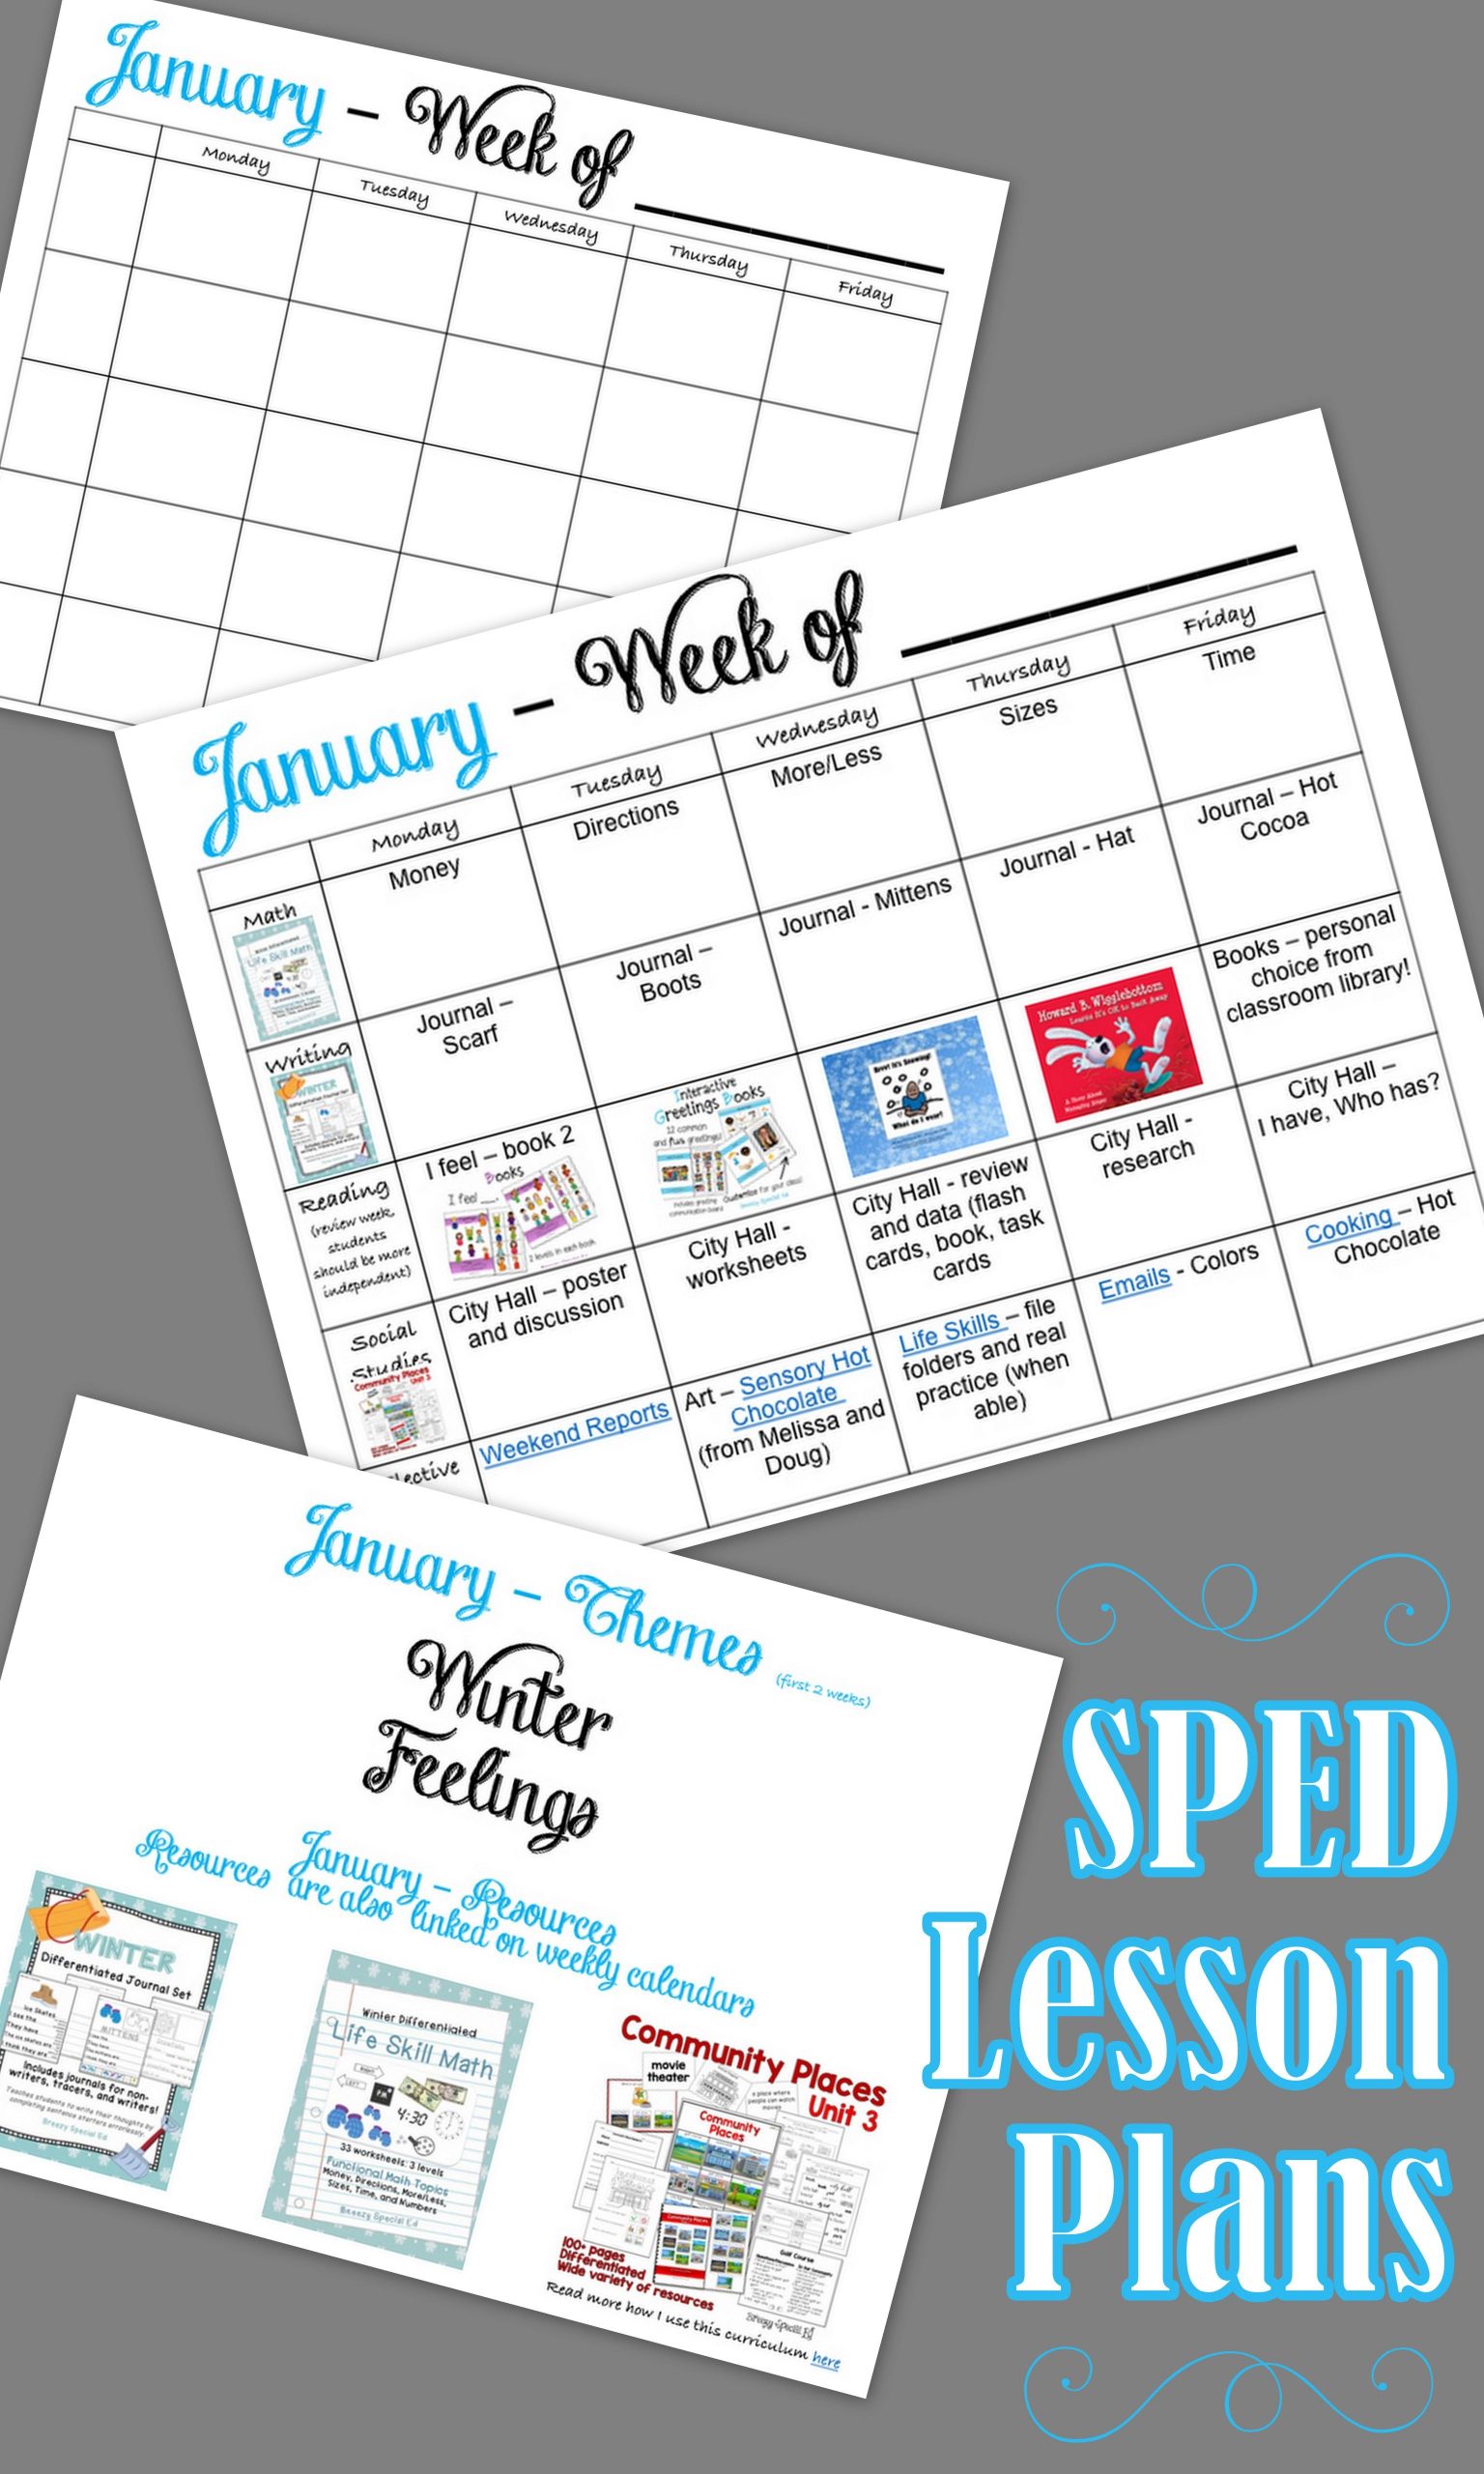 January Lesson Plans For Special Education | Life Skills